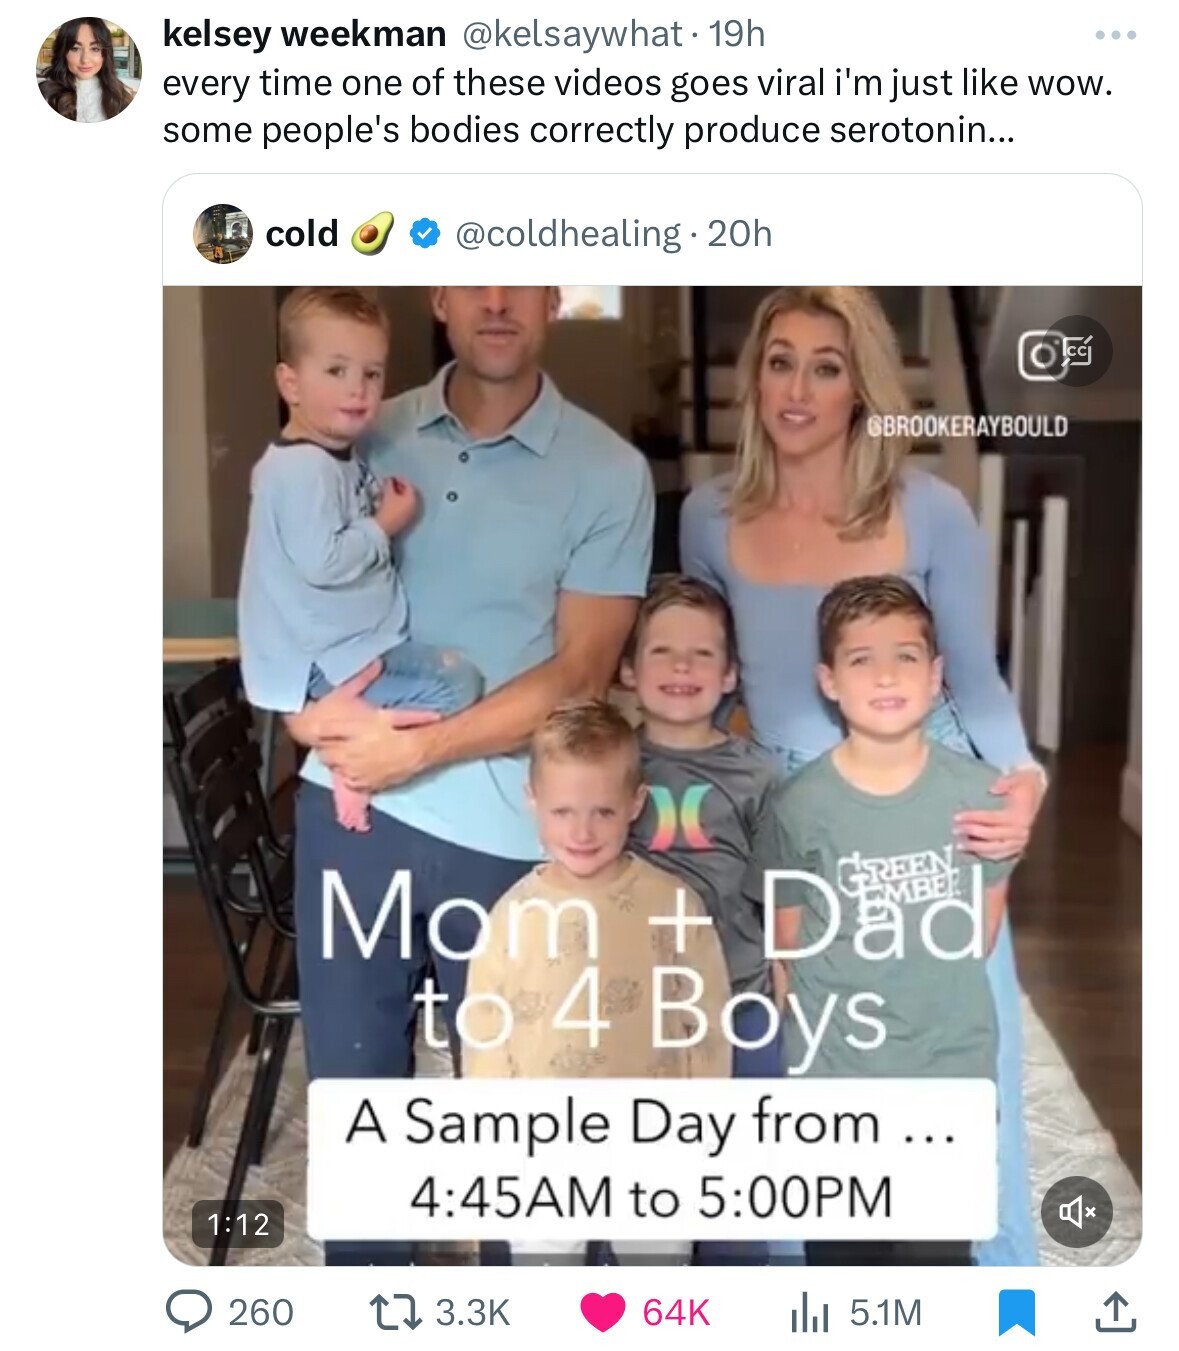 t shirt - kelsey weekman . 19h every time one of these videos goes viral i'm just wow. some people's bodies correctly produce serotonin... . 20h cold 260 9 Mom Dad to 4 Boys A Sample Day from ... Am to Pm O 64K 5.1M